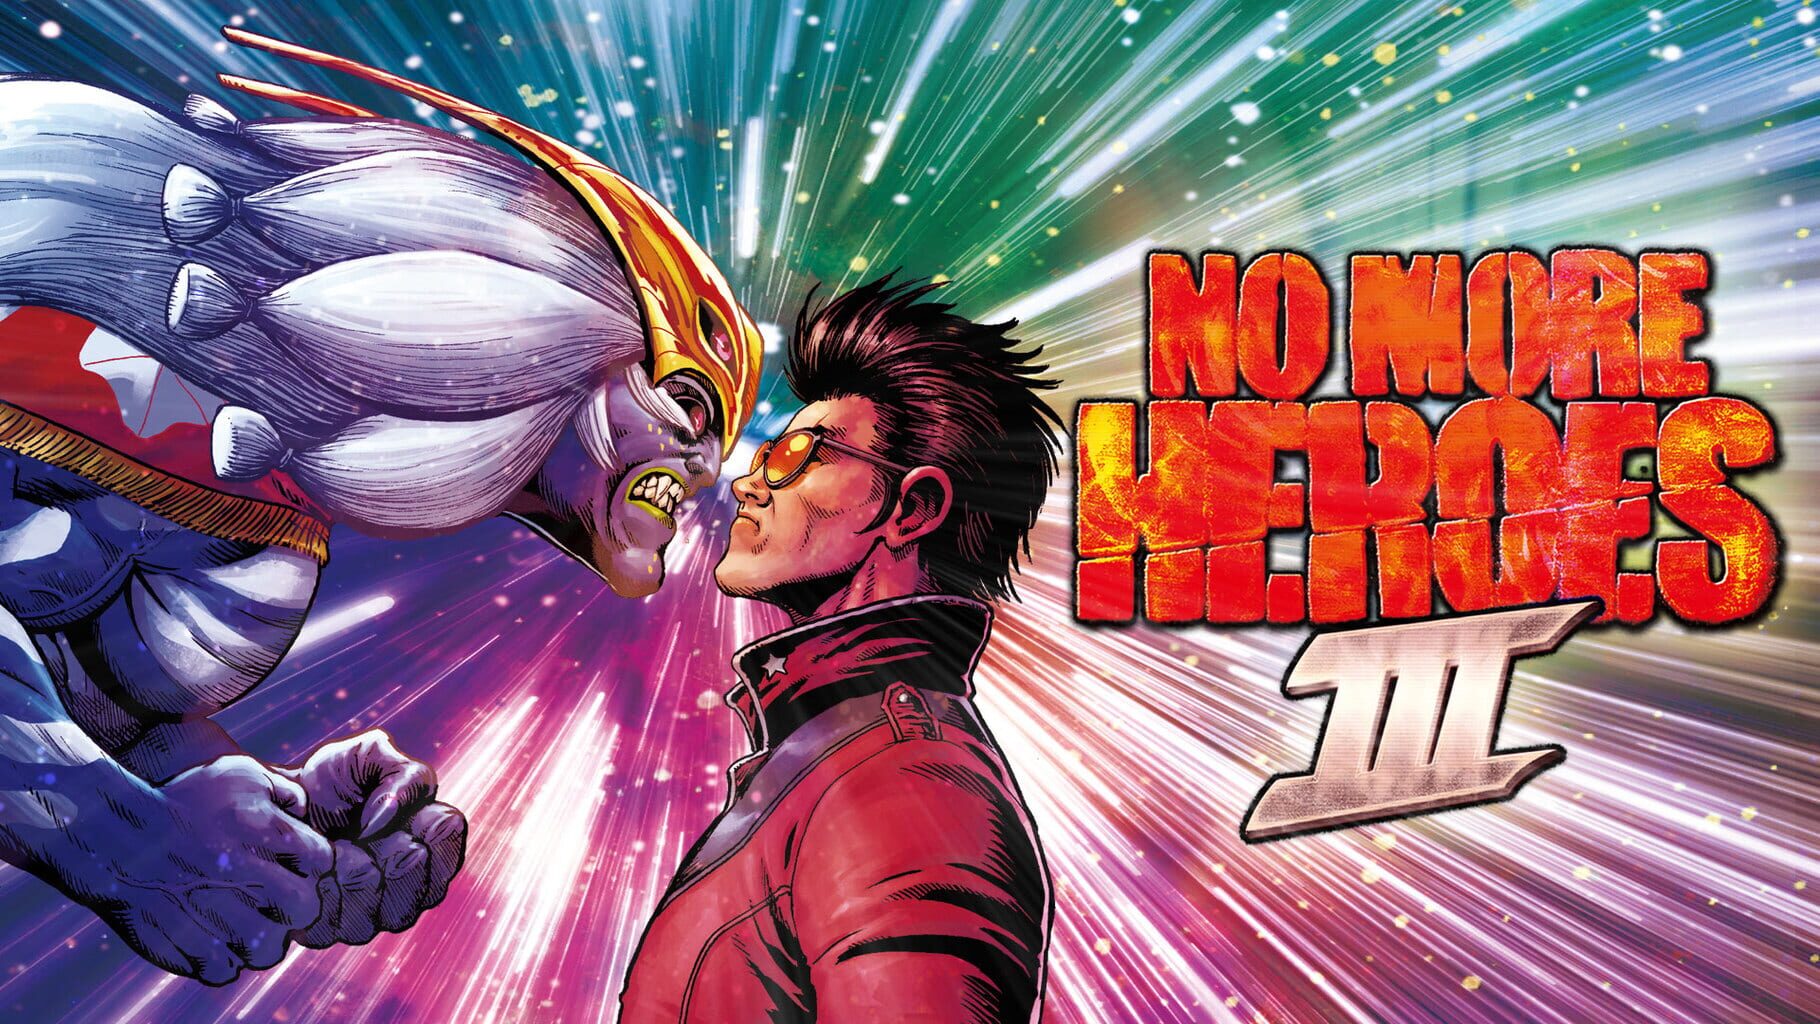 Artwork for No More Heroes III